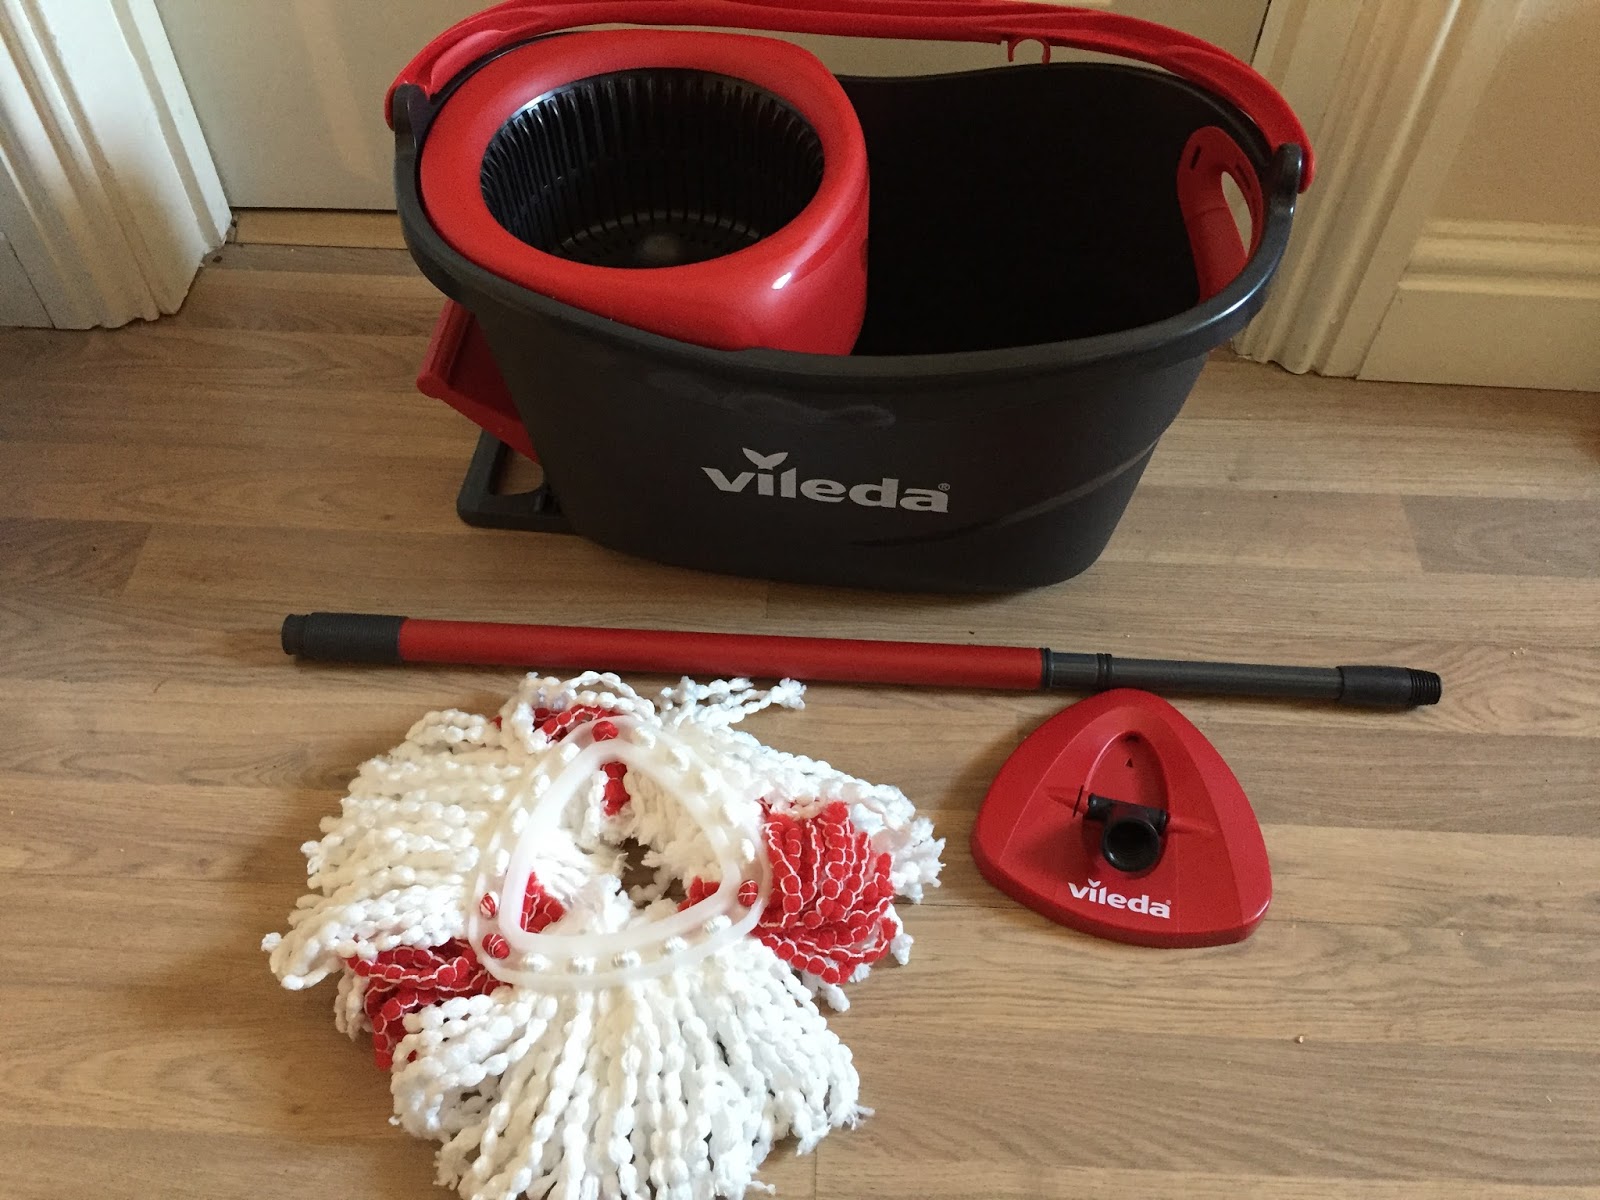 Vileda Easy Wring Clean Turbo mop and bucket (review) - Steph's